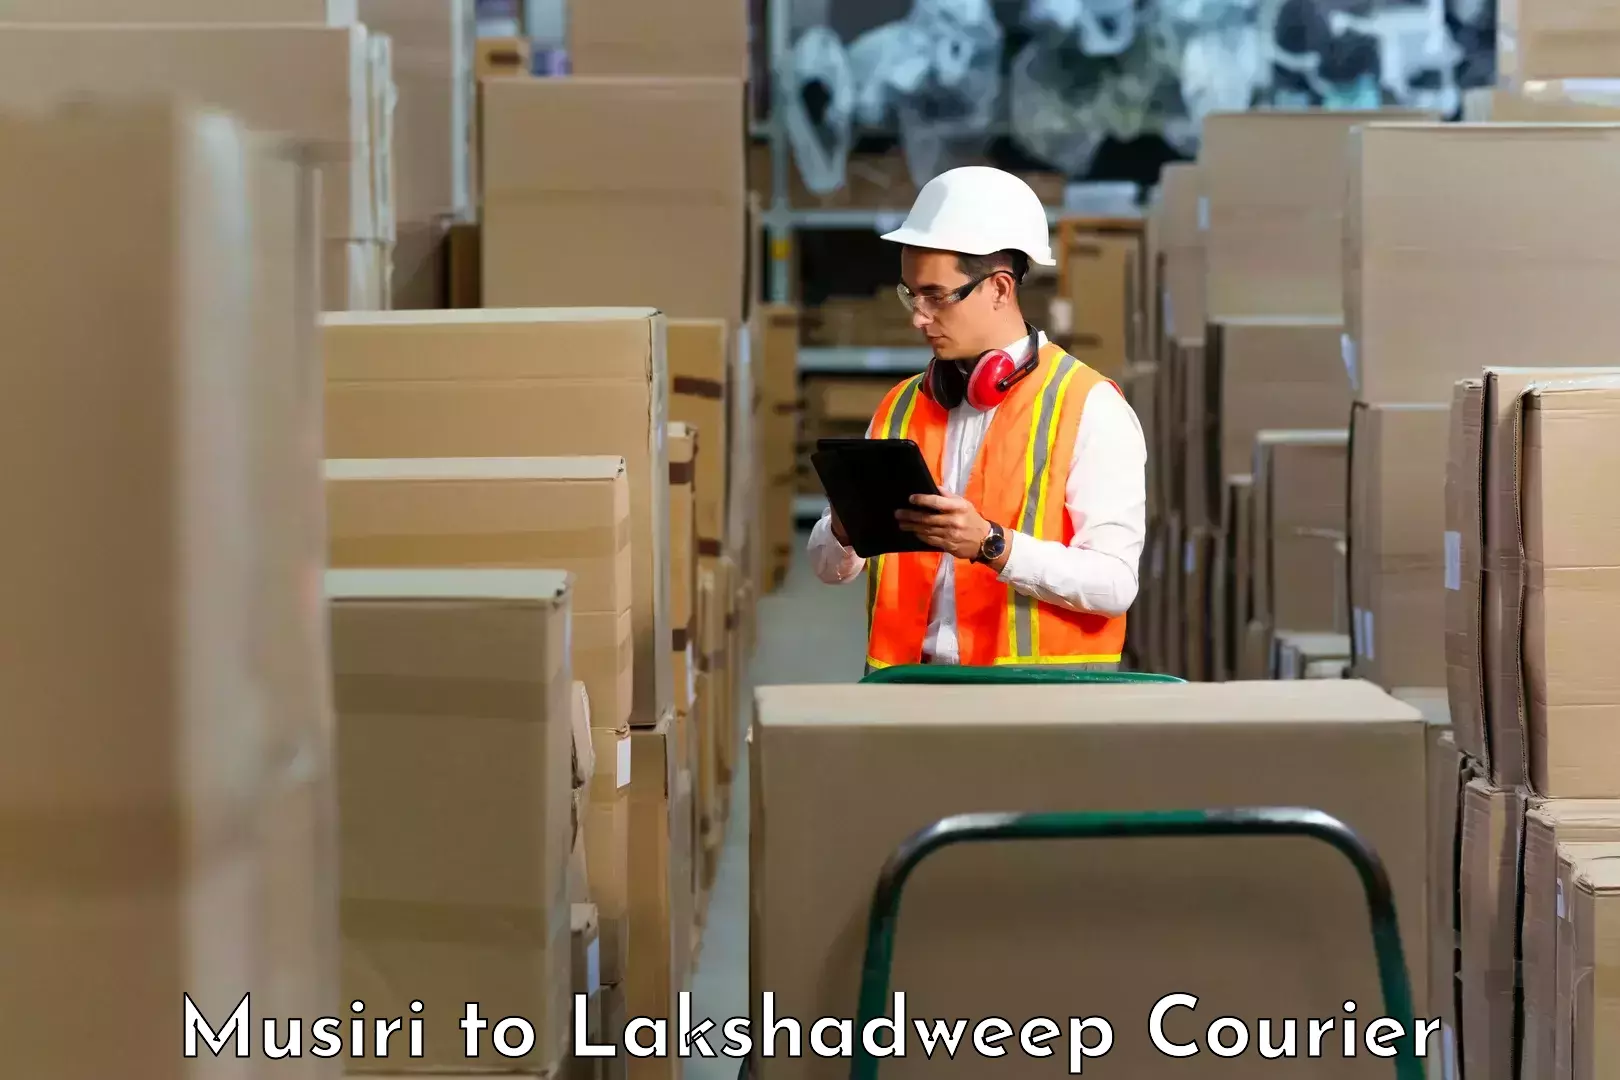 Efficient courier operations in Musiri to Lakshadweep